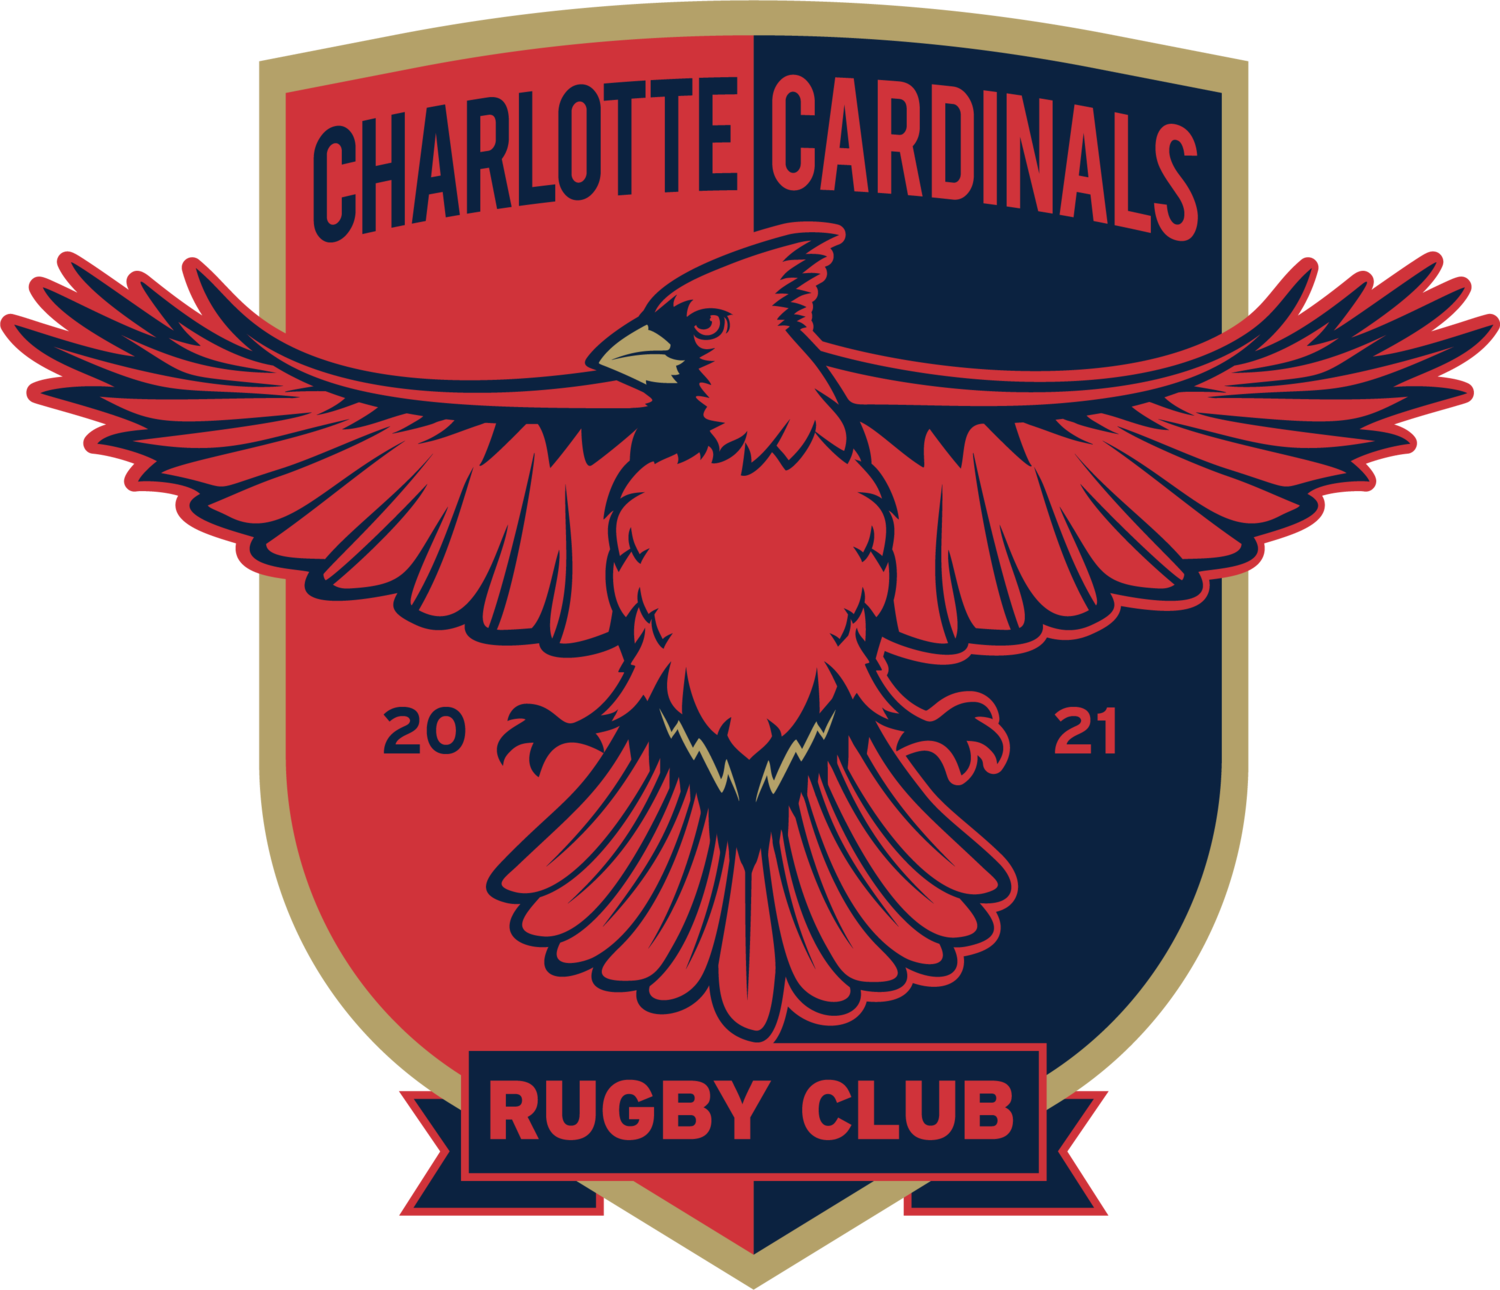 Charlotte Cardinals Rugby Club